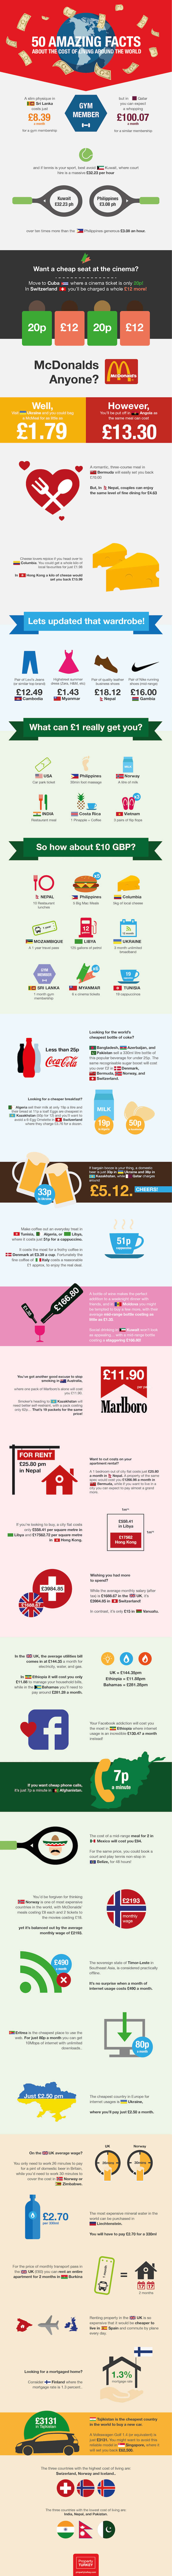 50 amazing facts about living abroad